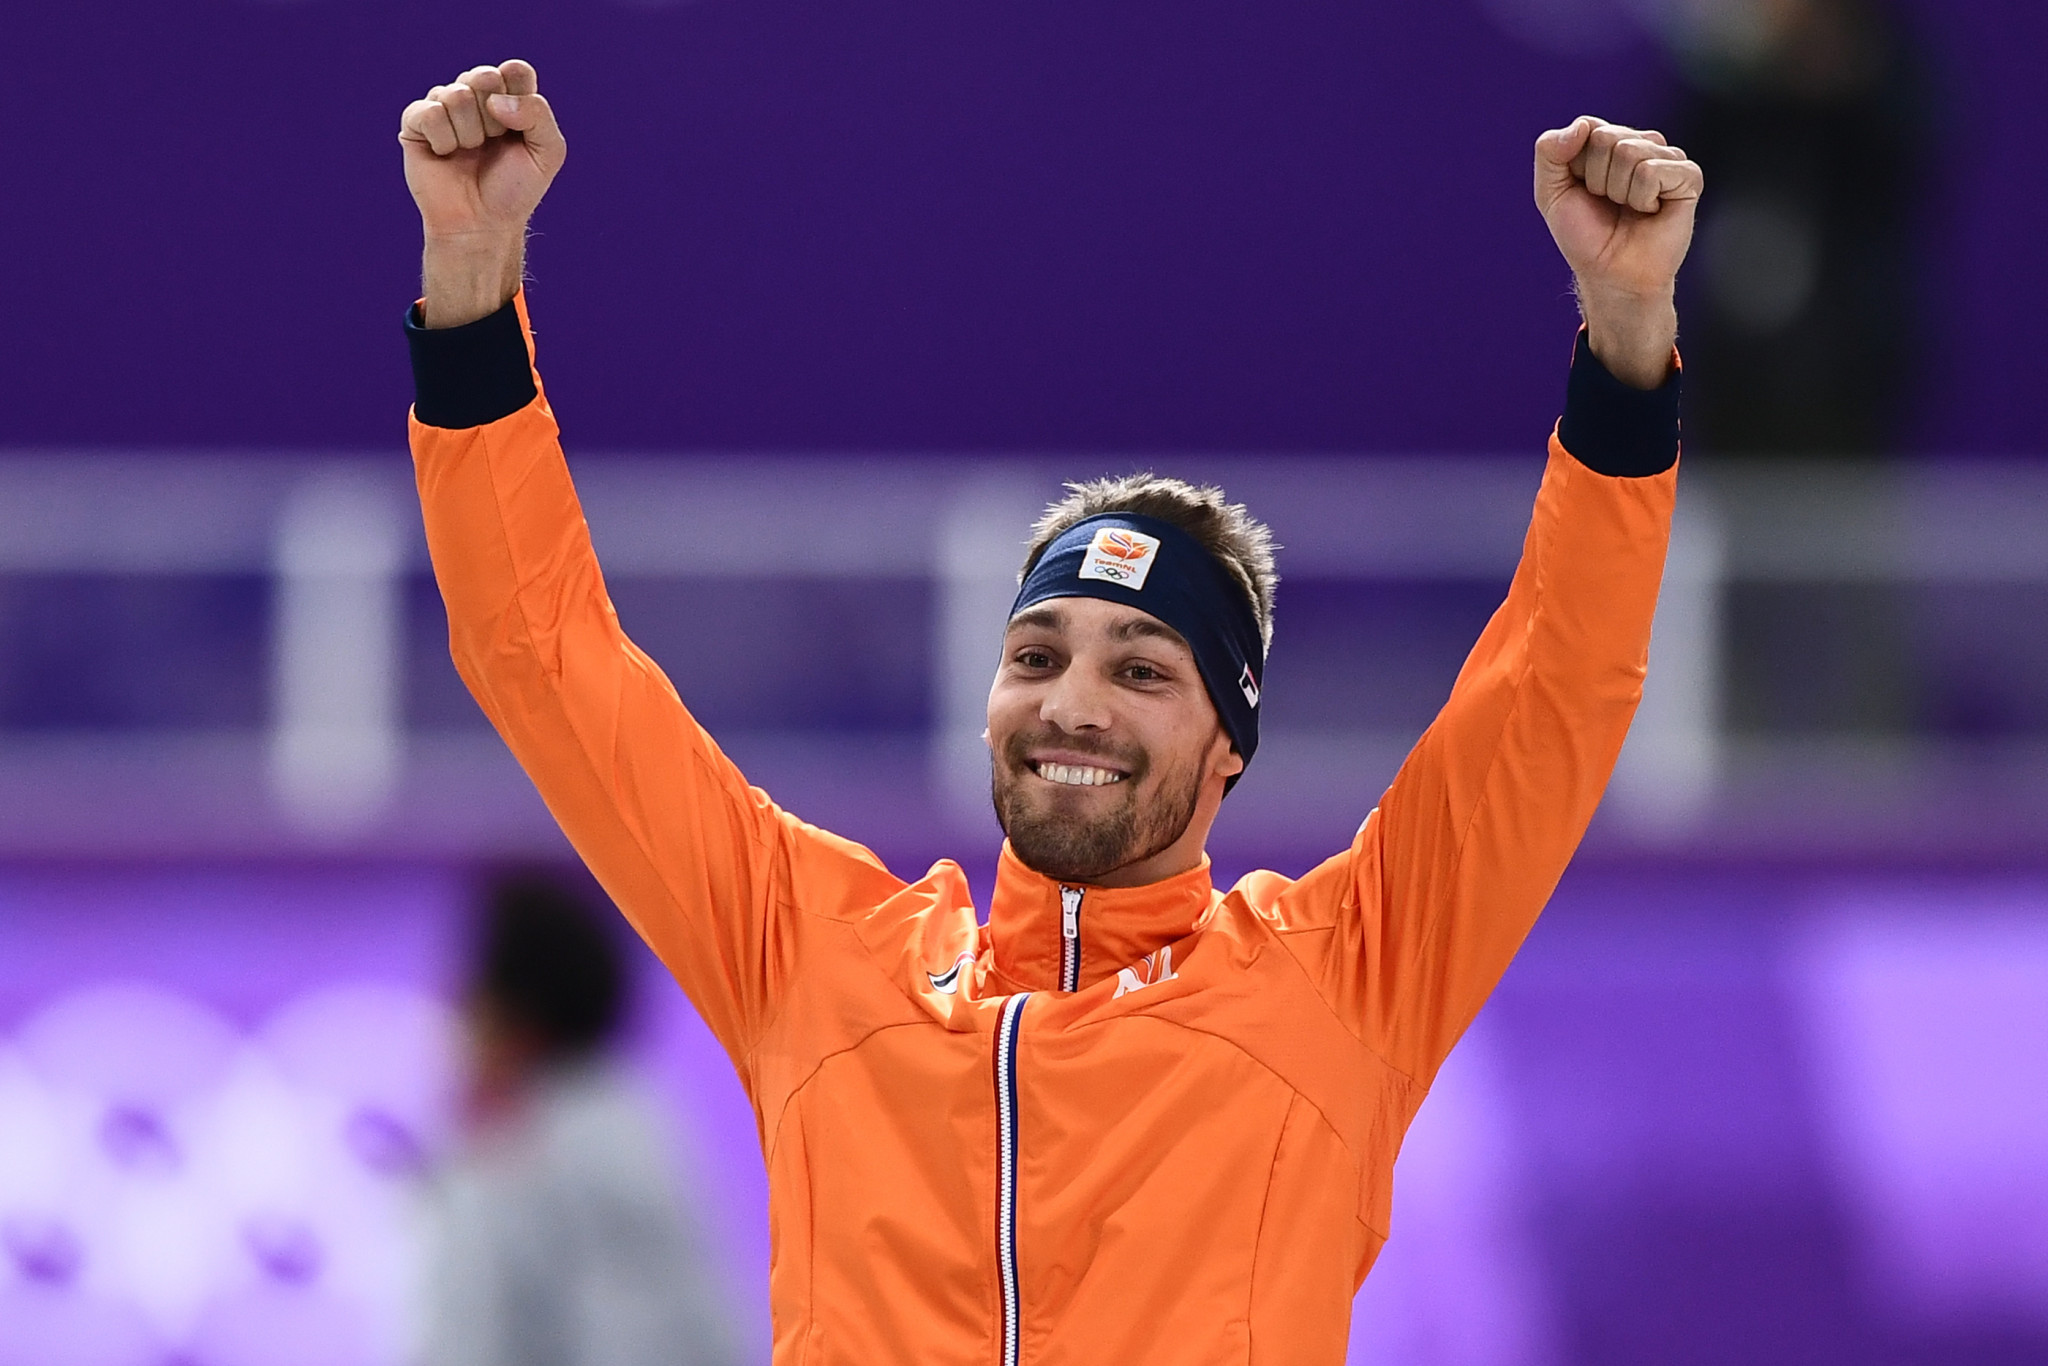 Nuis claims men's 1,500m gold as Netherlands' speed skating domination continues at Pyeongchang 2018